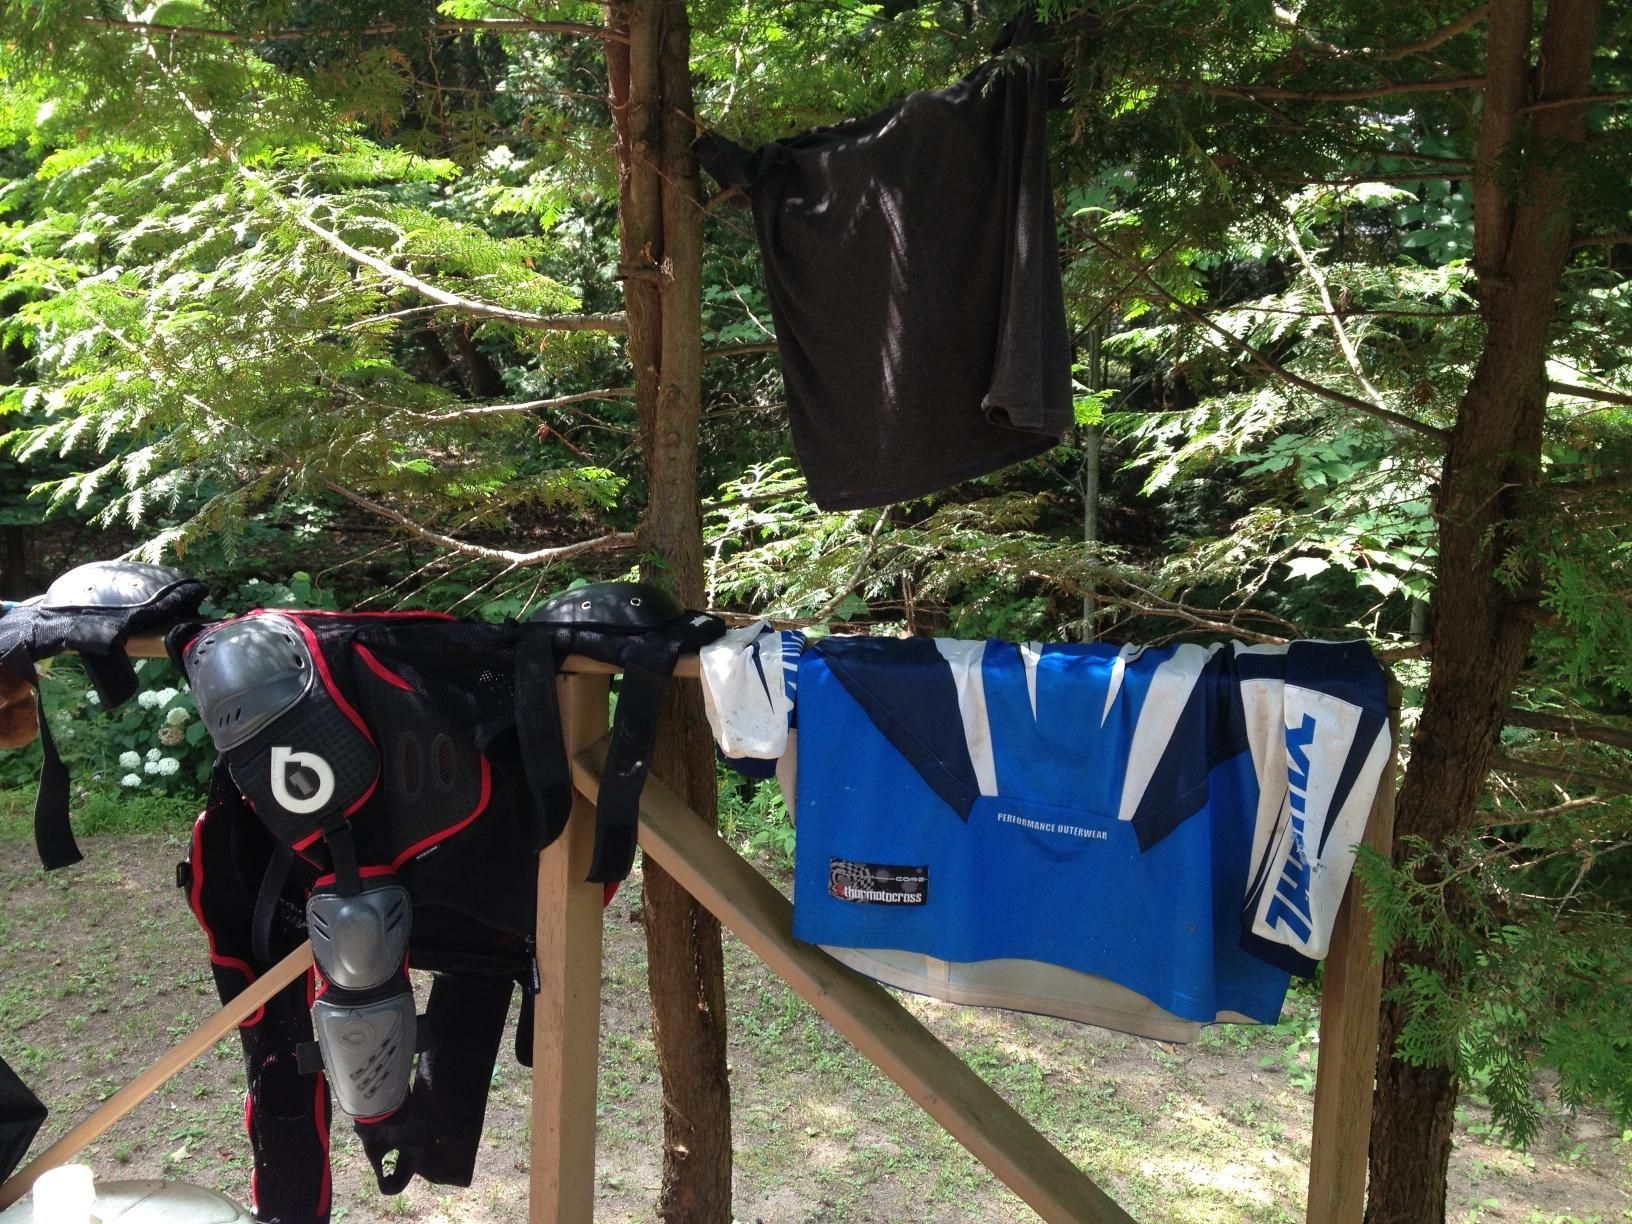 Drying my gear off - there's nothing worse than sweaty dirt riding gear